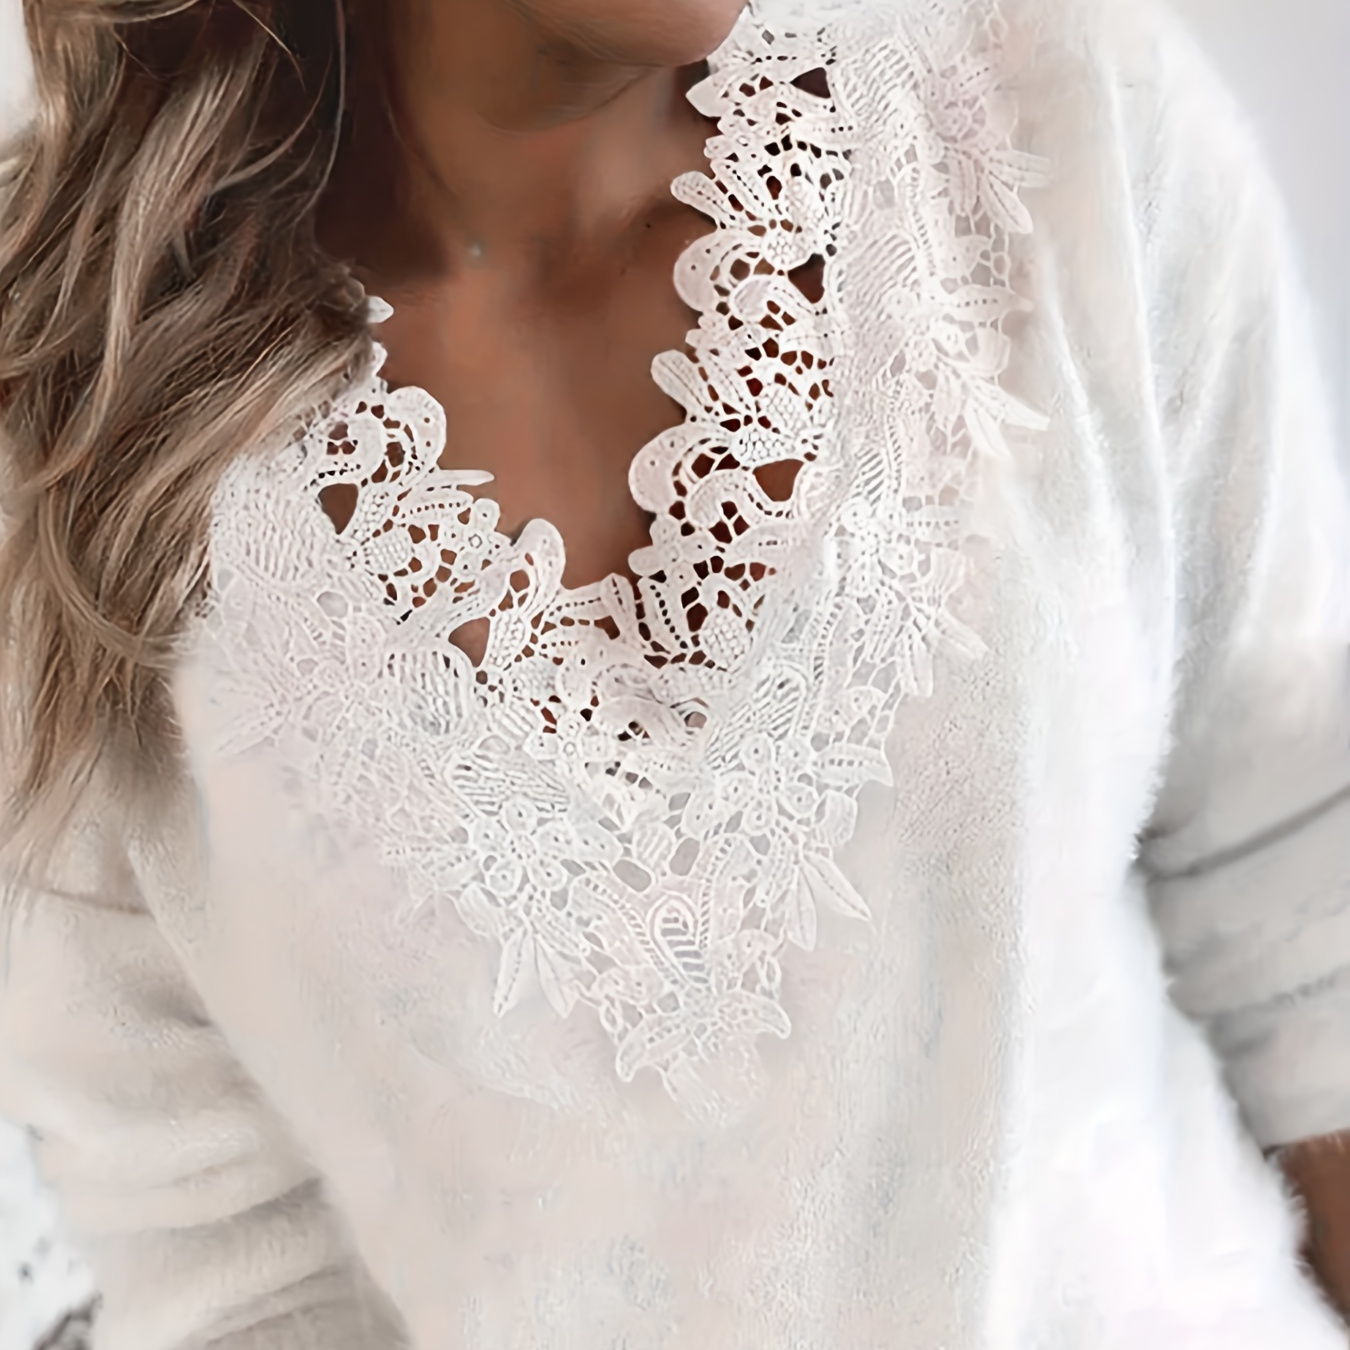 

Contrast Lace Solid Knit Sweater, Elegant V Neck Long Sleeve Sweater, Women's Clothing